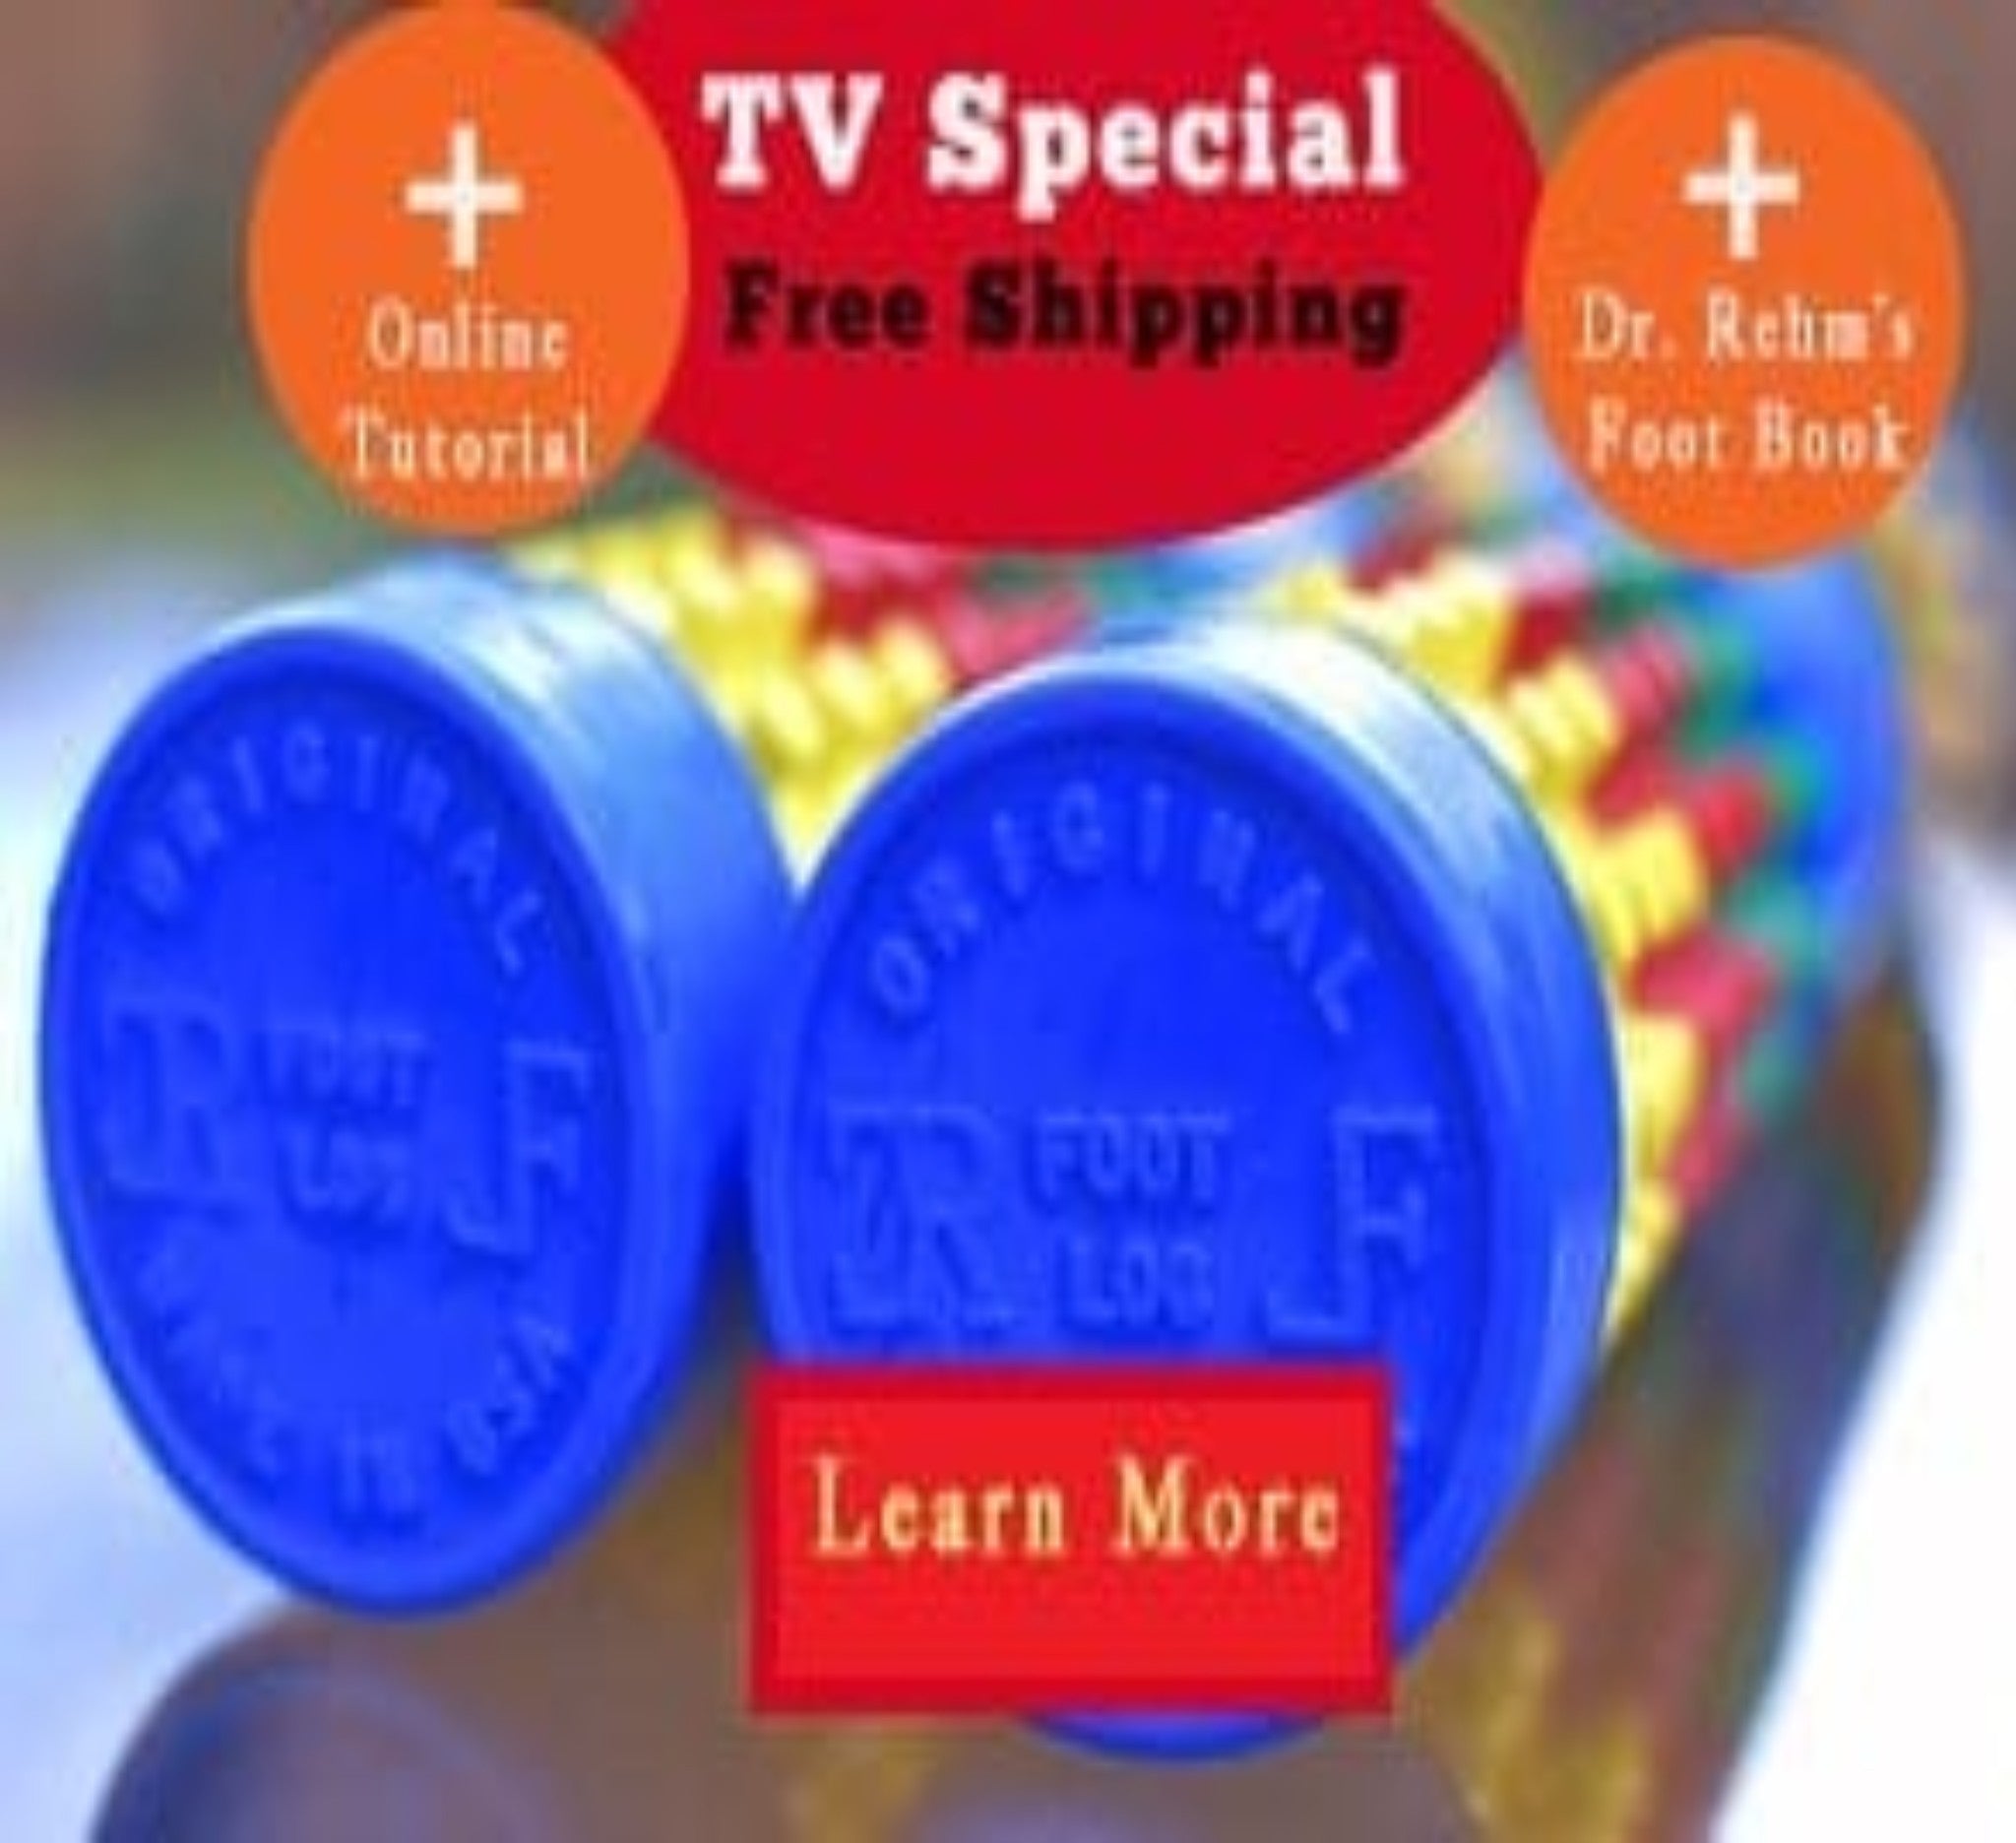 2 Installments: 2 FootLogs (A Rainbow) Bundle + Free Shipping – TV SPECIAL